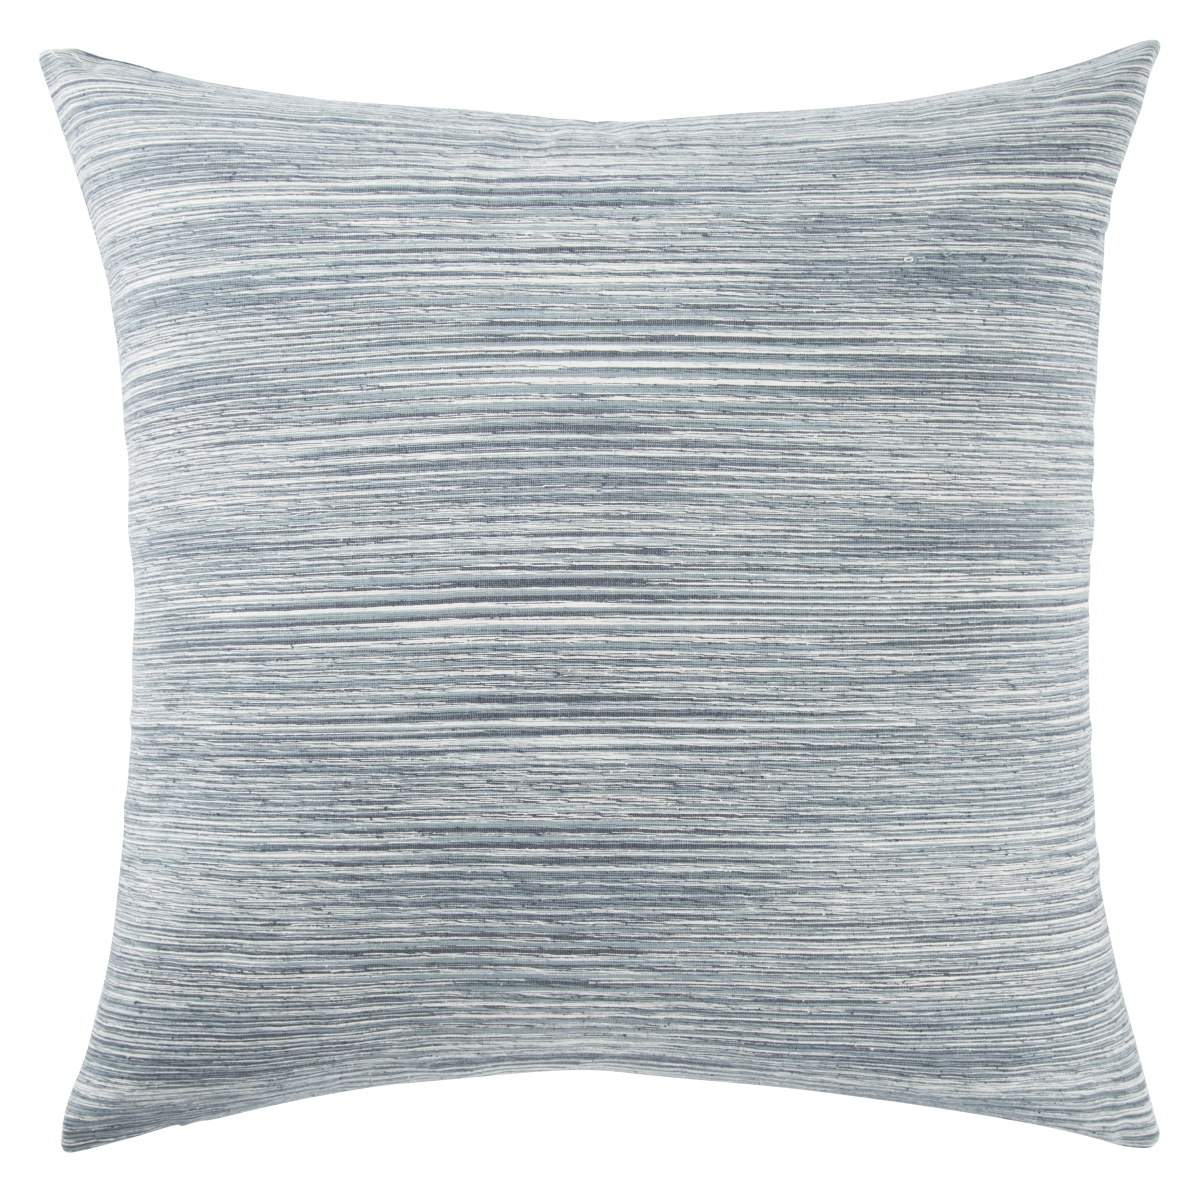 Plw103130 22 X 22 In. Mandarina Galexy Blue & White Solid Poly Throw Pillow